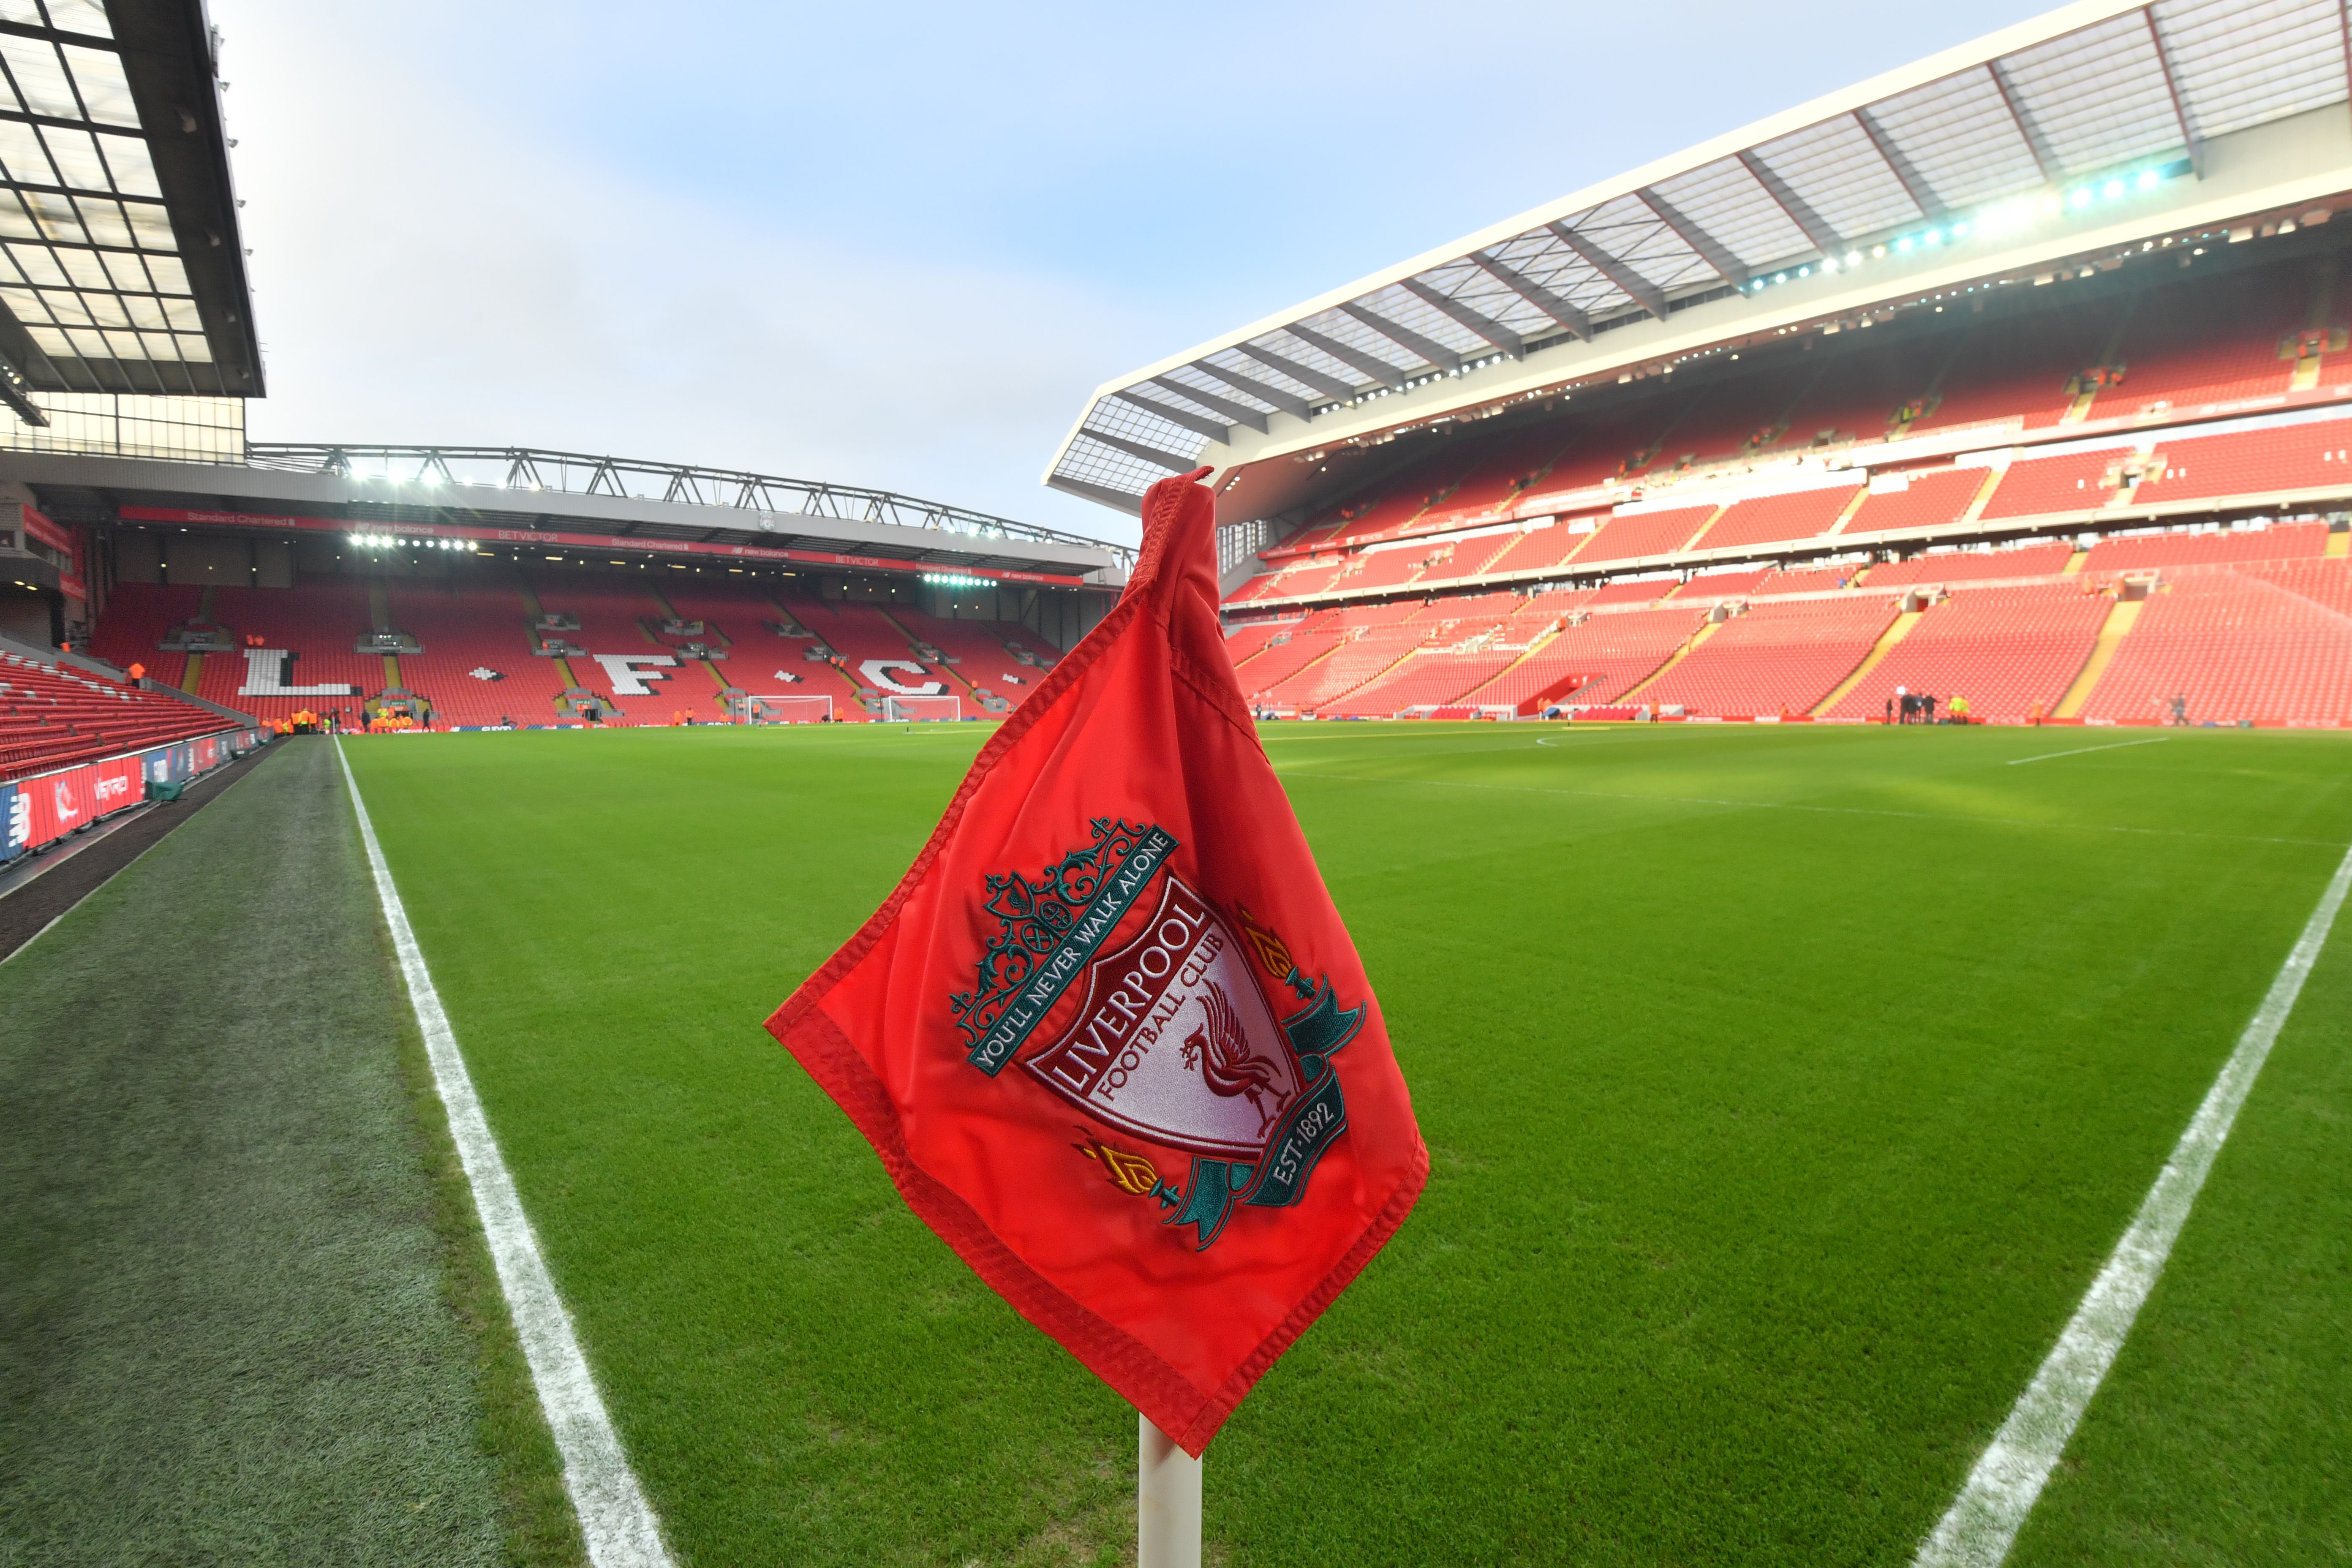 The pitch and stand inside Anfield are seen ahead of the English Premier League football match between Liverpool and Swansea City at Anfield in Liverpool, north west England on January 21, 2017. / AFP / Anthony DEVLIN / RESTRICTED TO EDITORIAL USE. No use with unauthorized audio, video, data, fixture lists, club/league logos or 'live' services. Online in-match use limited to 75 images, no video emulation. No use in betting, games or single club/league/player publications.  /         (Photo credit should read ANTHONY DEVLIN/AFP/Getty Images)